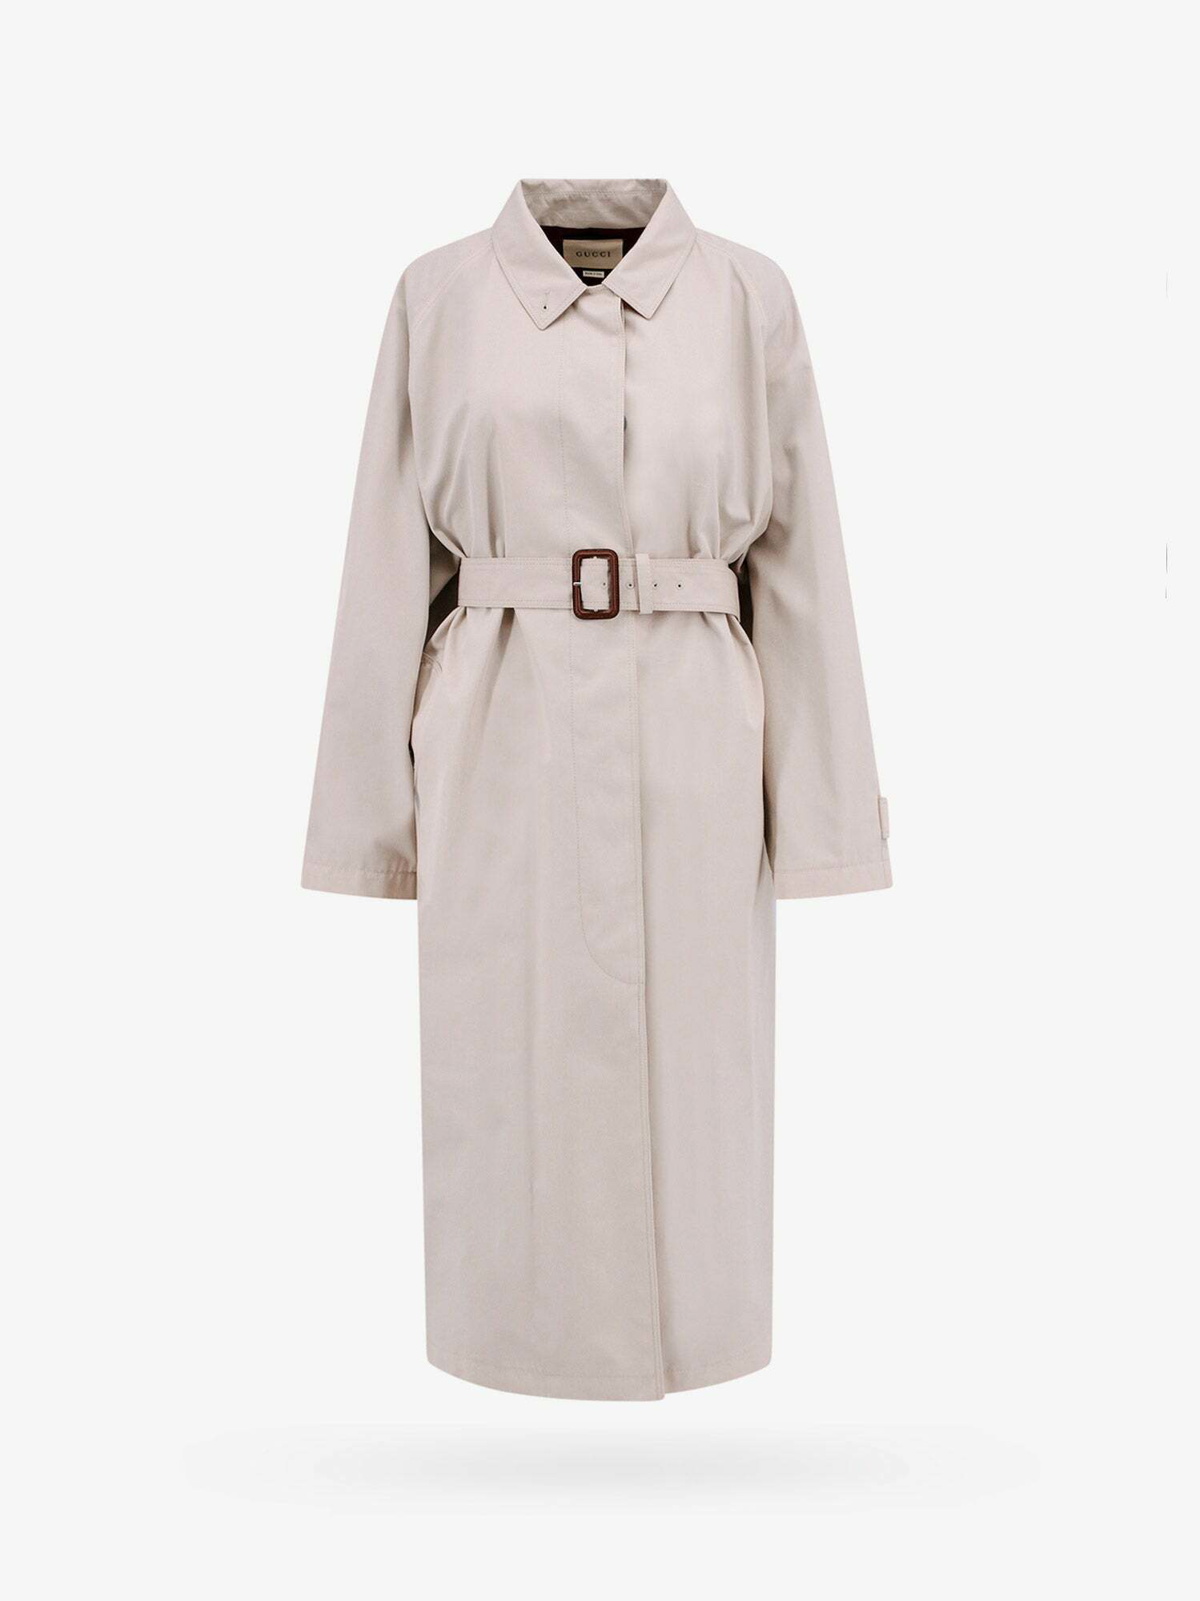 Gucci Beige & Brown Gg Supreme Trench Coat - 2184 Camel